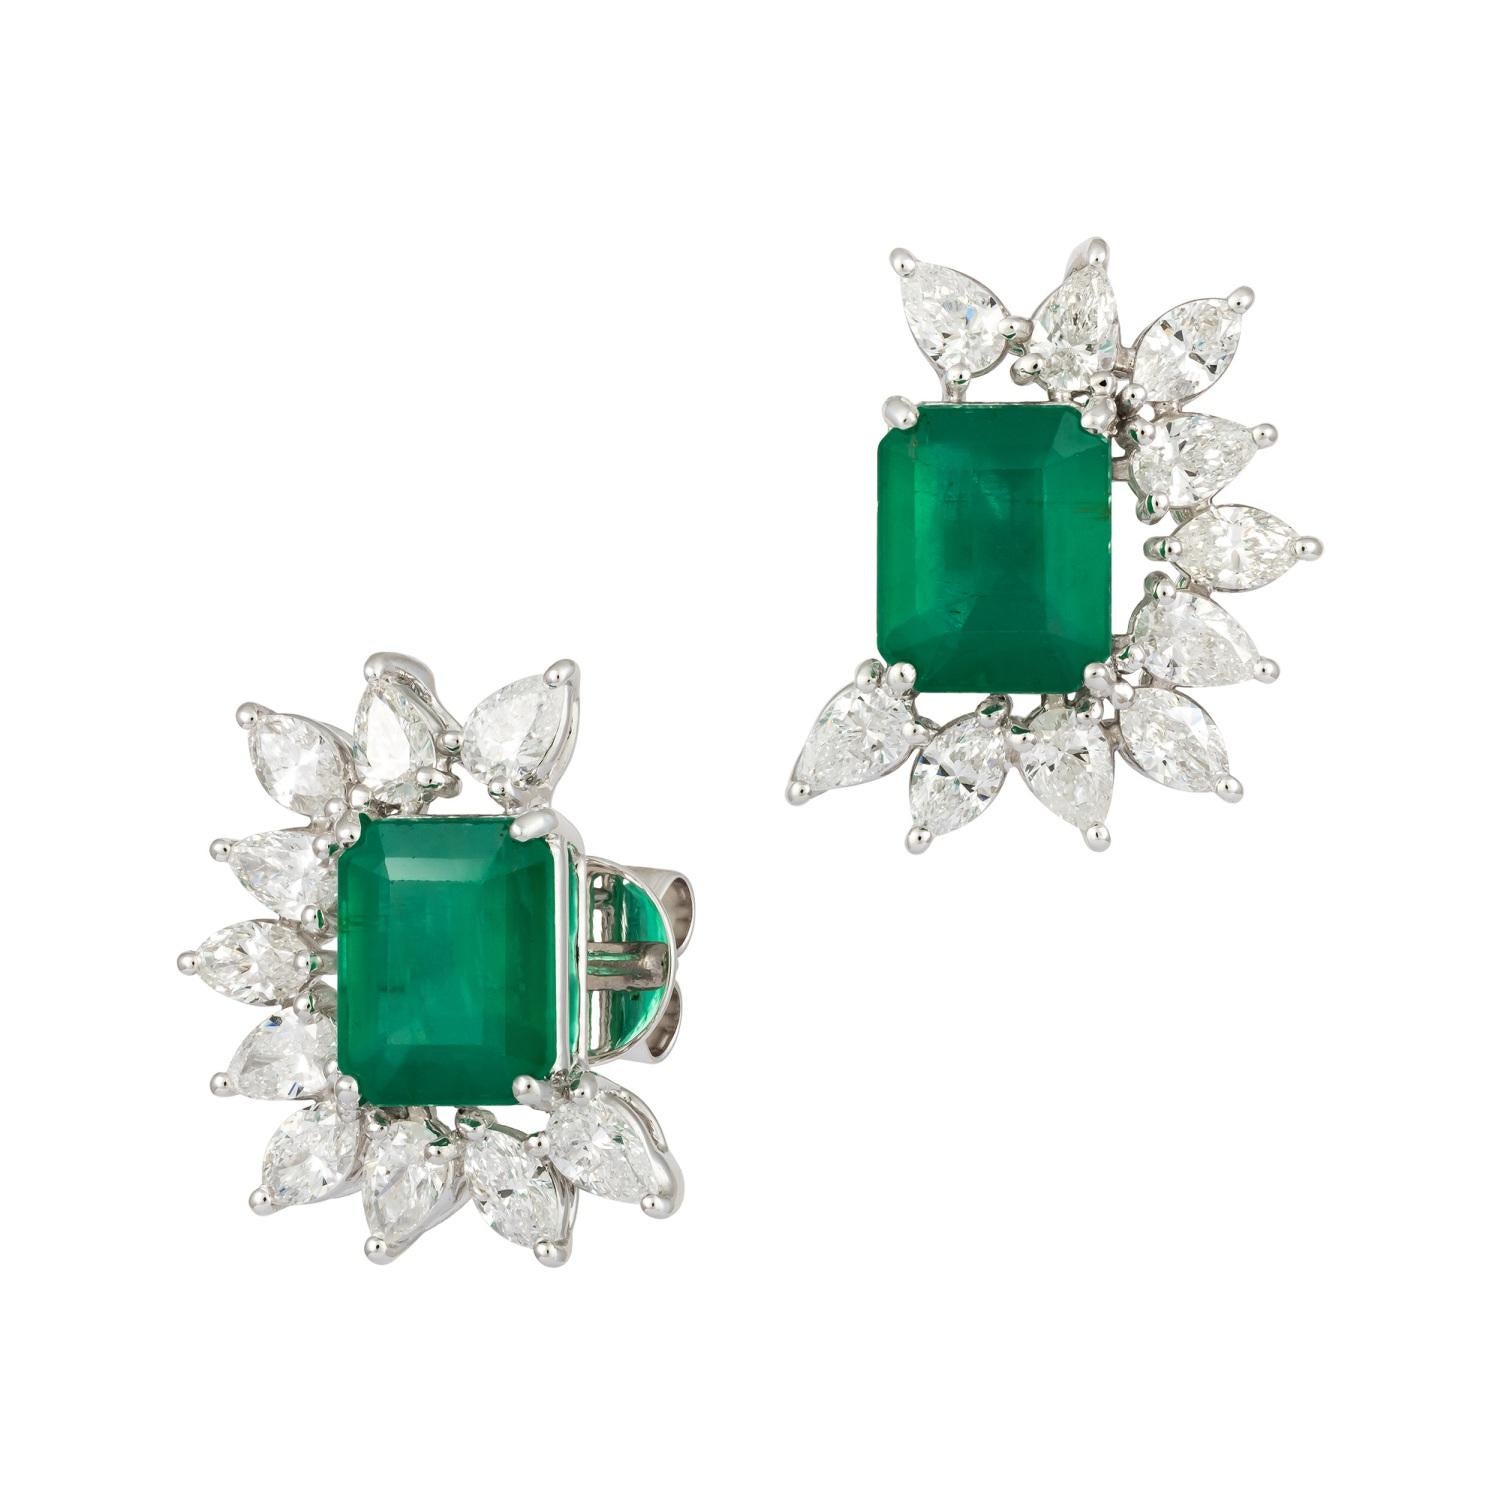 White 18K Gold Earrings 
Diamond 2.55 Cts / 20 Pcs
Emerald 4.48 Cts / 2 Pcs
Weight 6,36 grams

It is our honor to create fine jewelry, and it’s for that reason that we choose to only work with high-quality, enduring materials that can almost